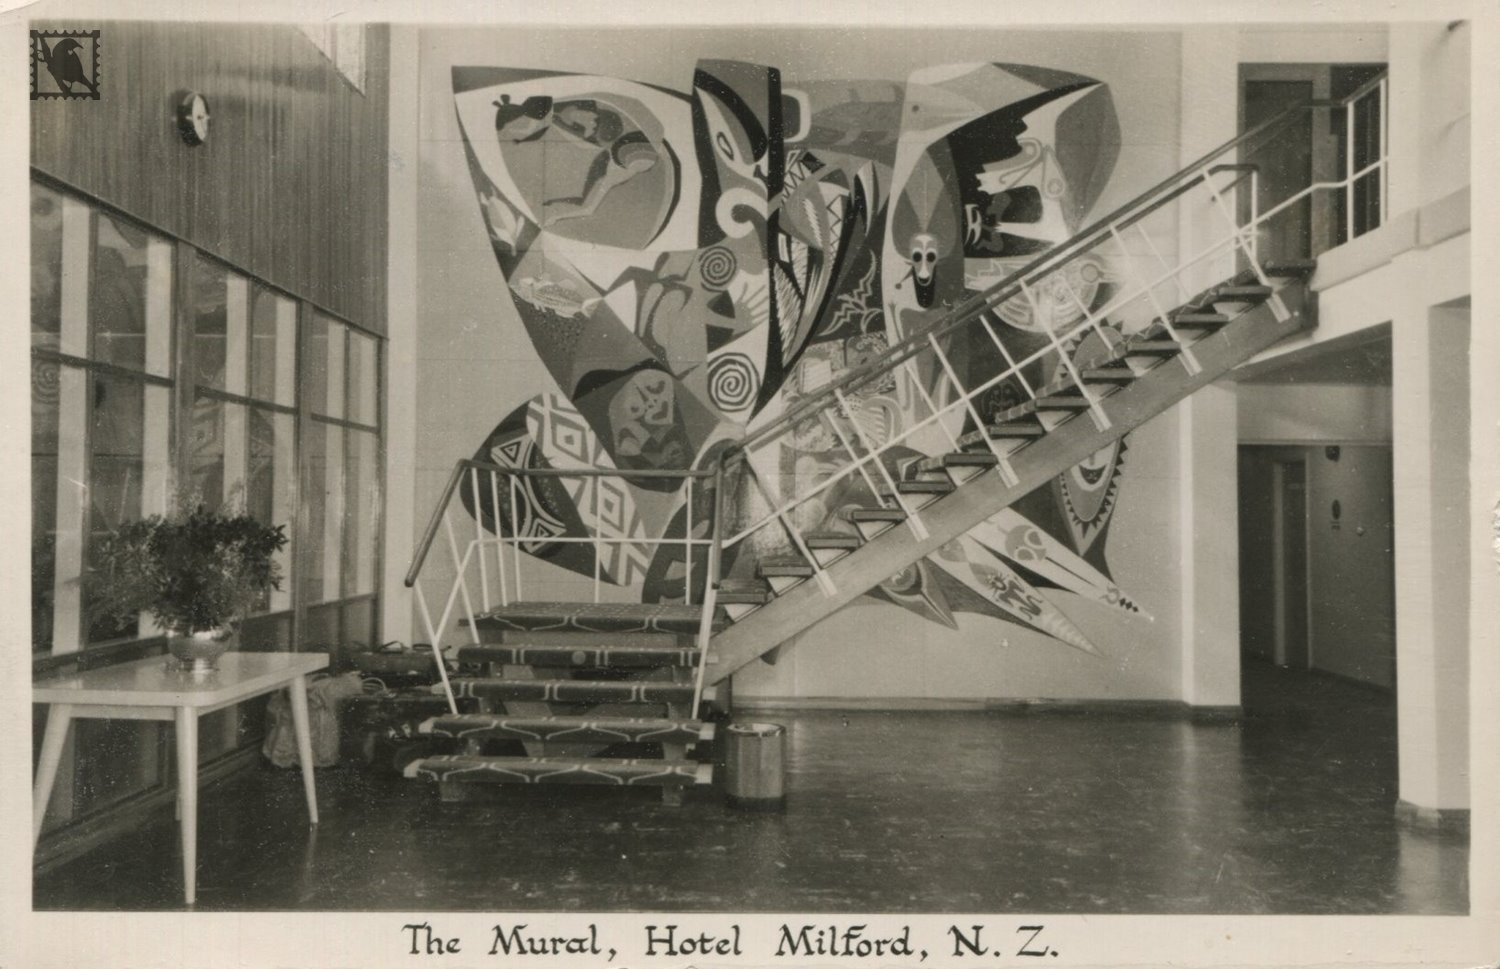 Fiordland - The Mural, Hotel Milford